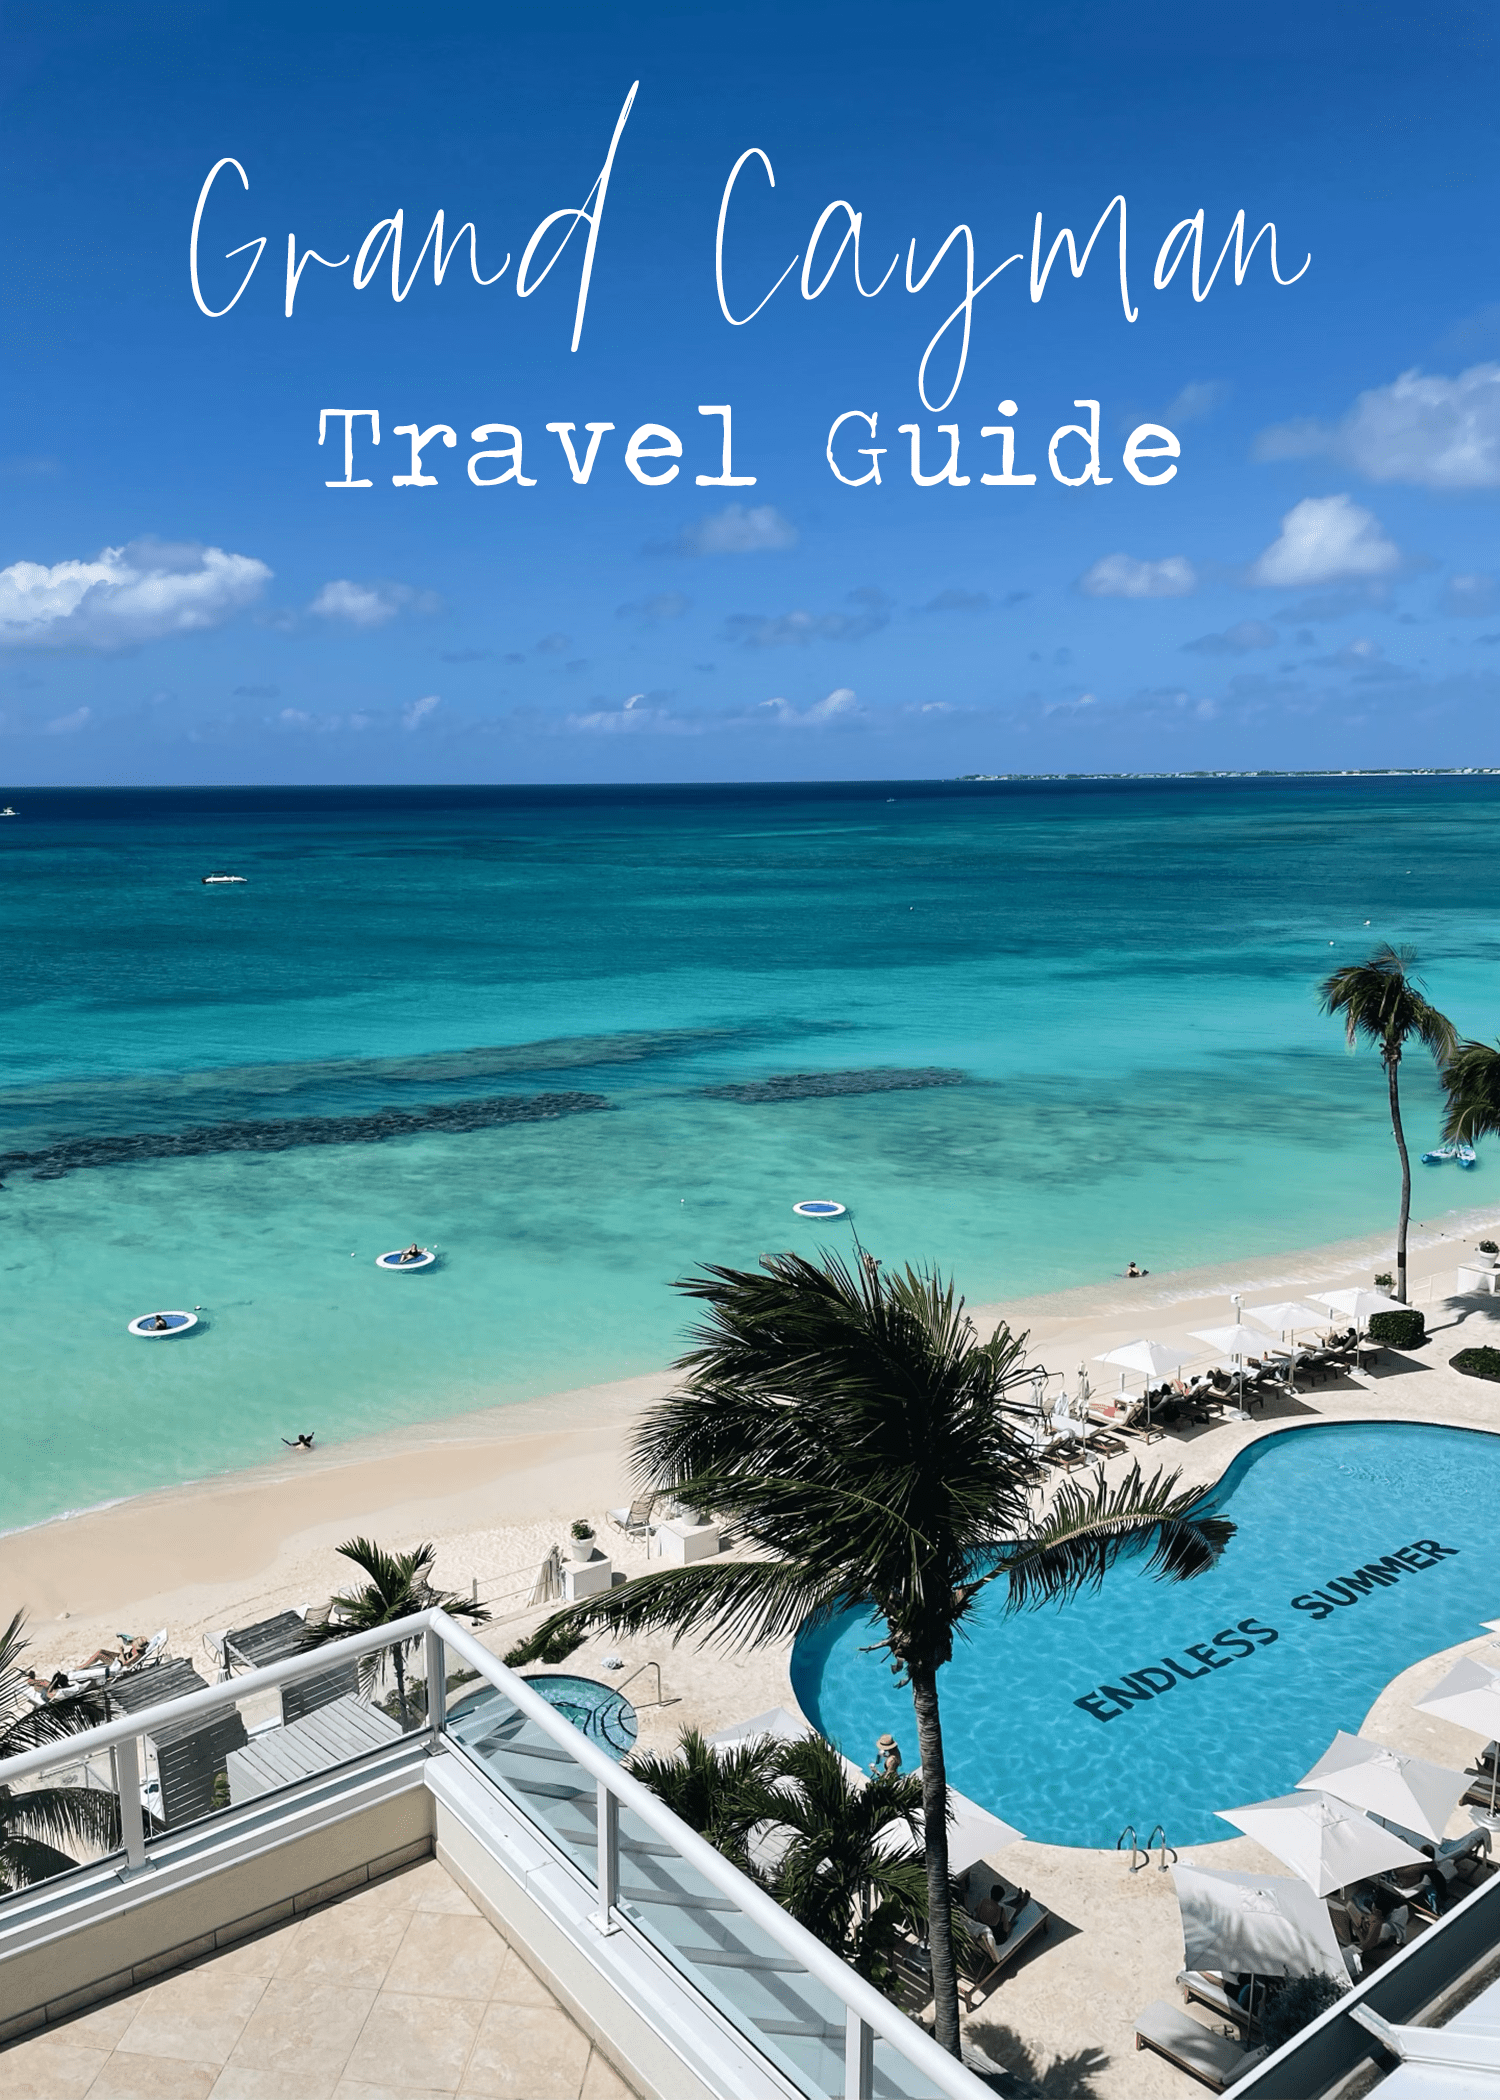 Grand Cayman travel guide